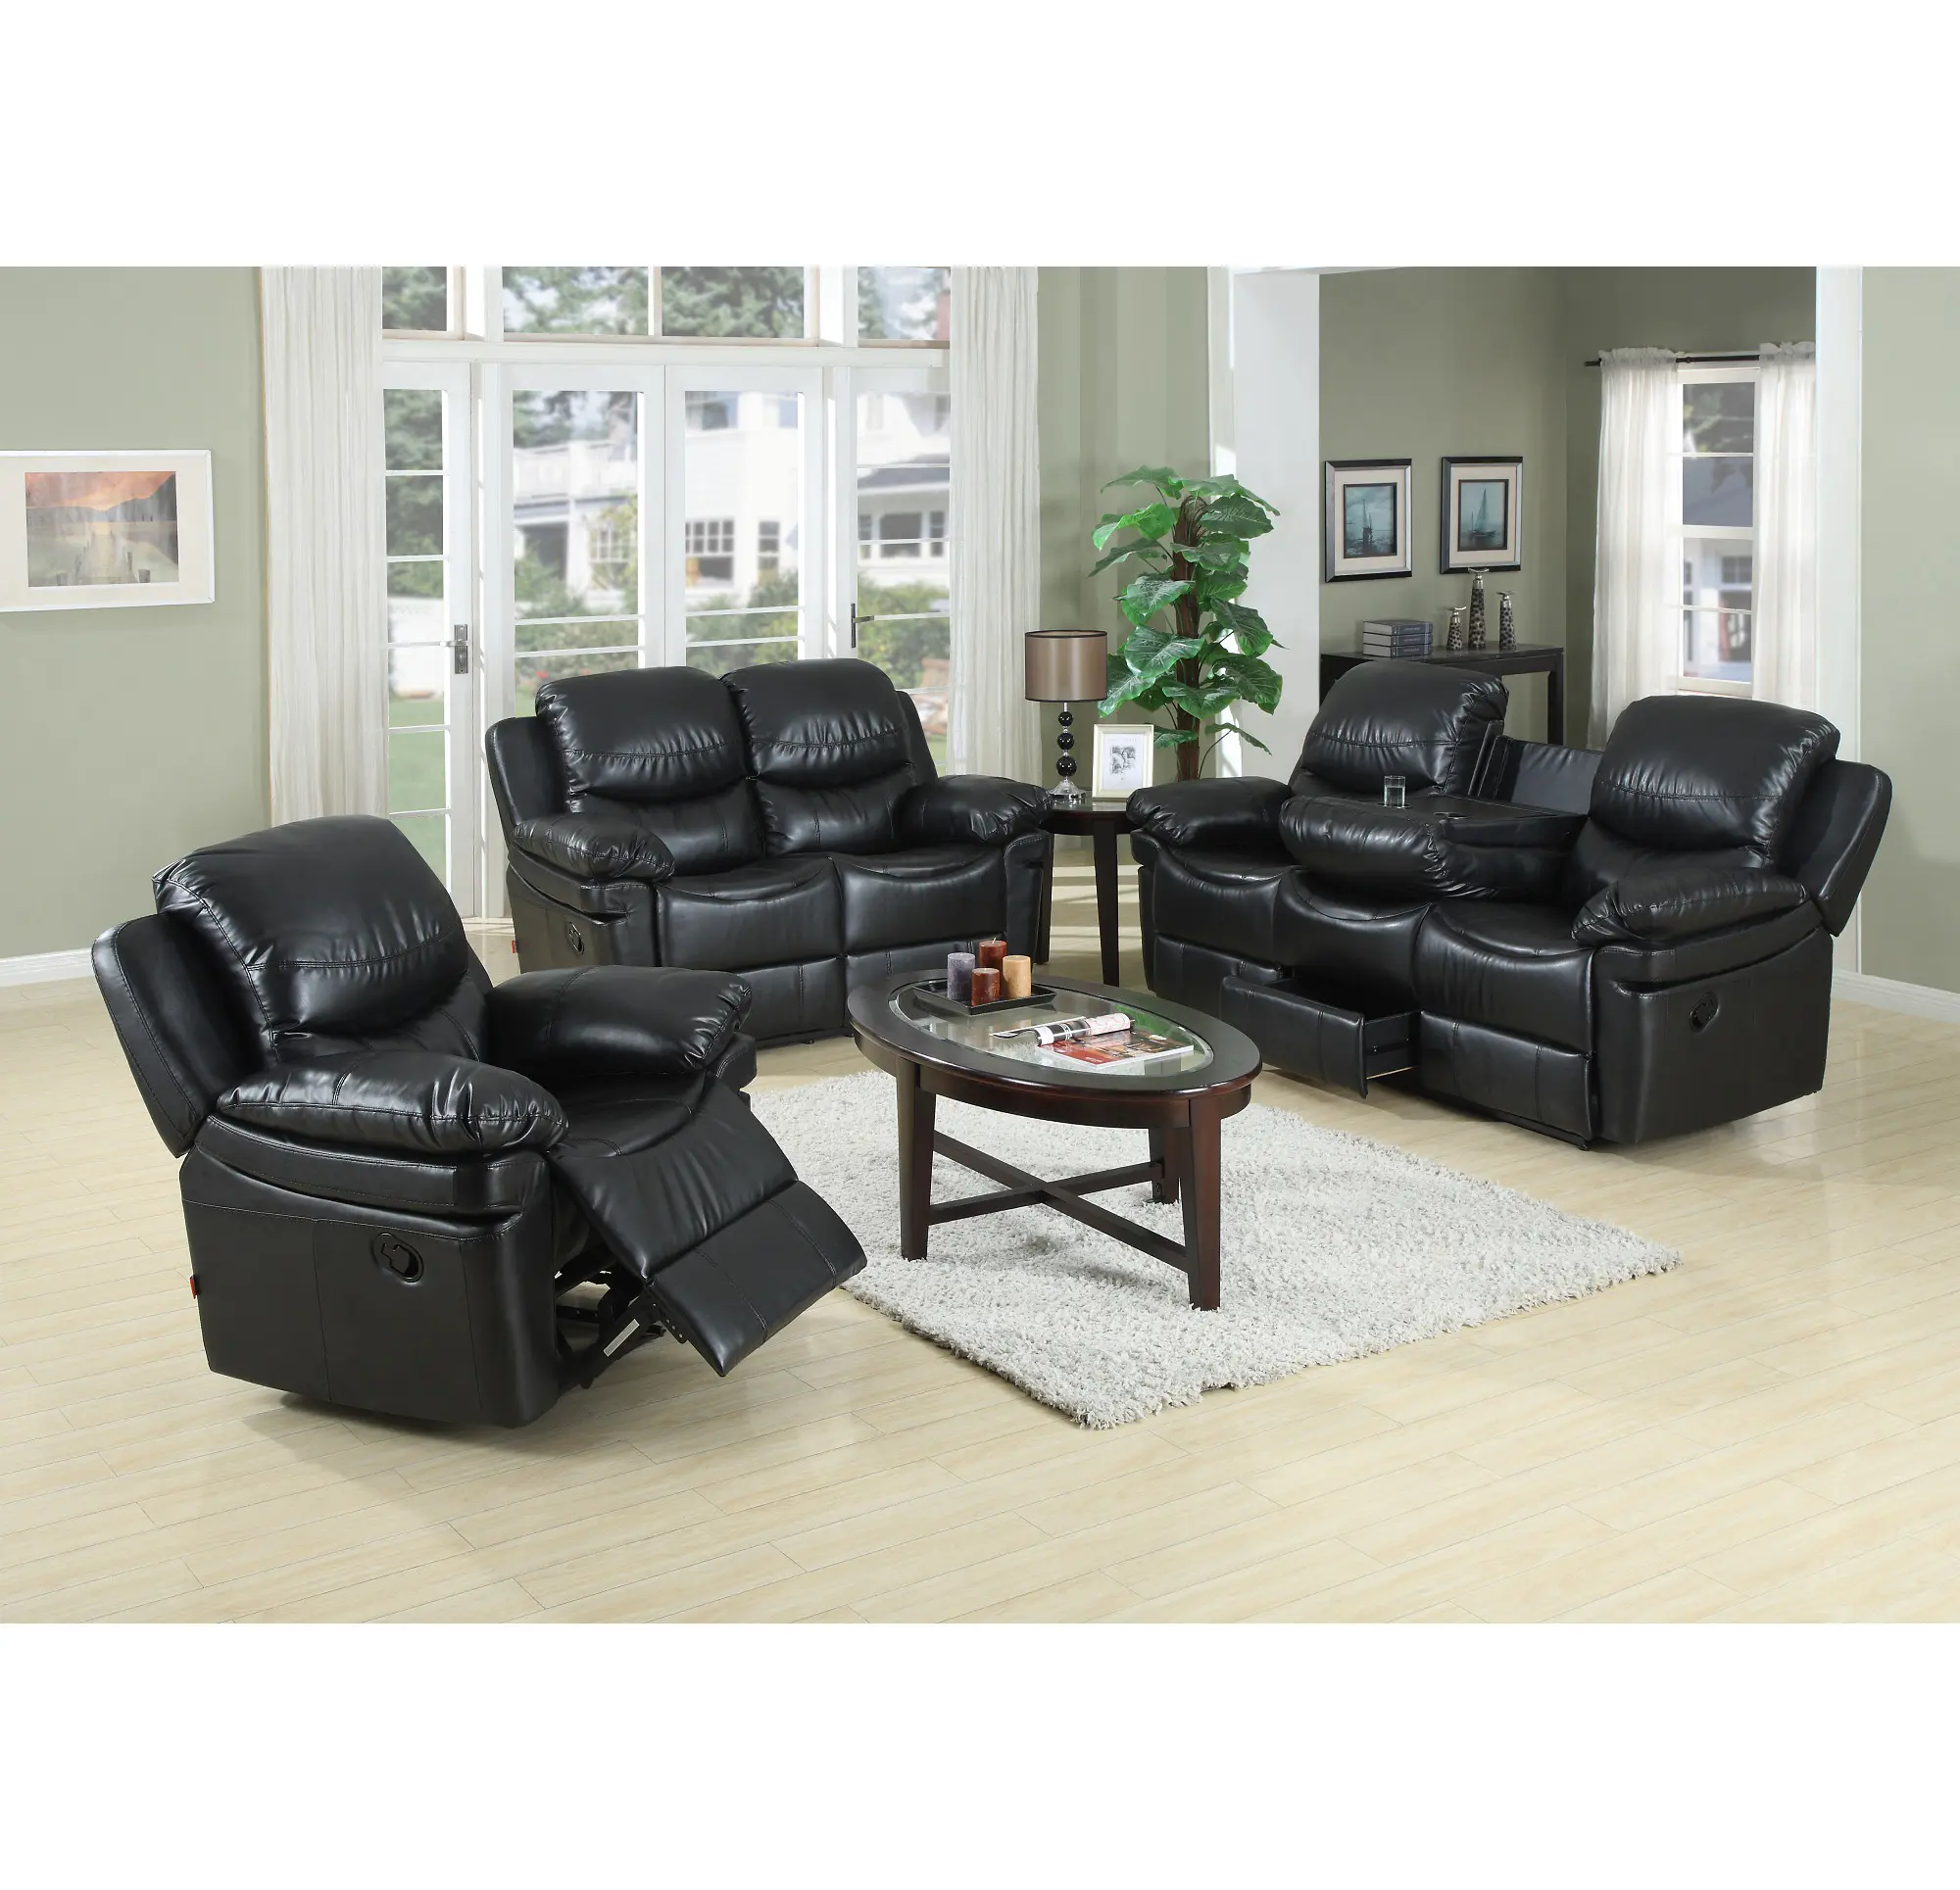 Factory supply OEM wide tv couches for online sale office/hotel recliner sectional sofa set